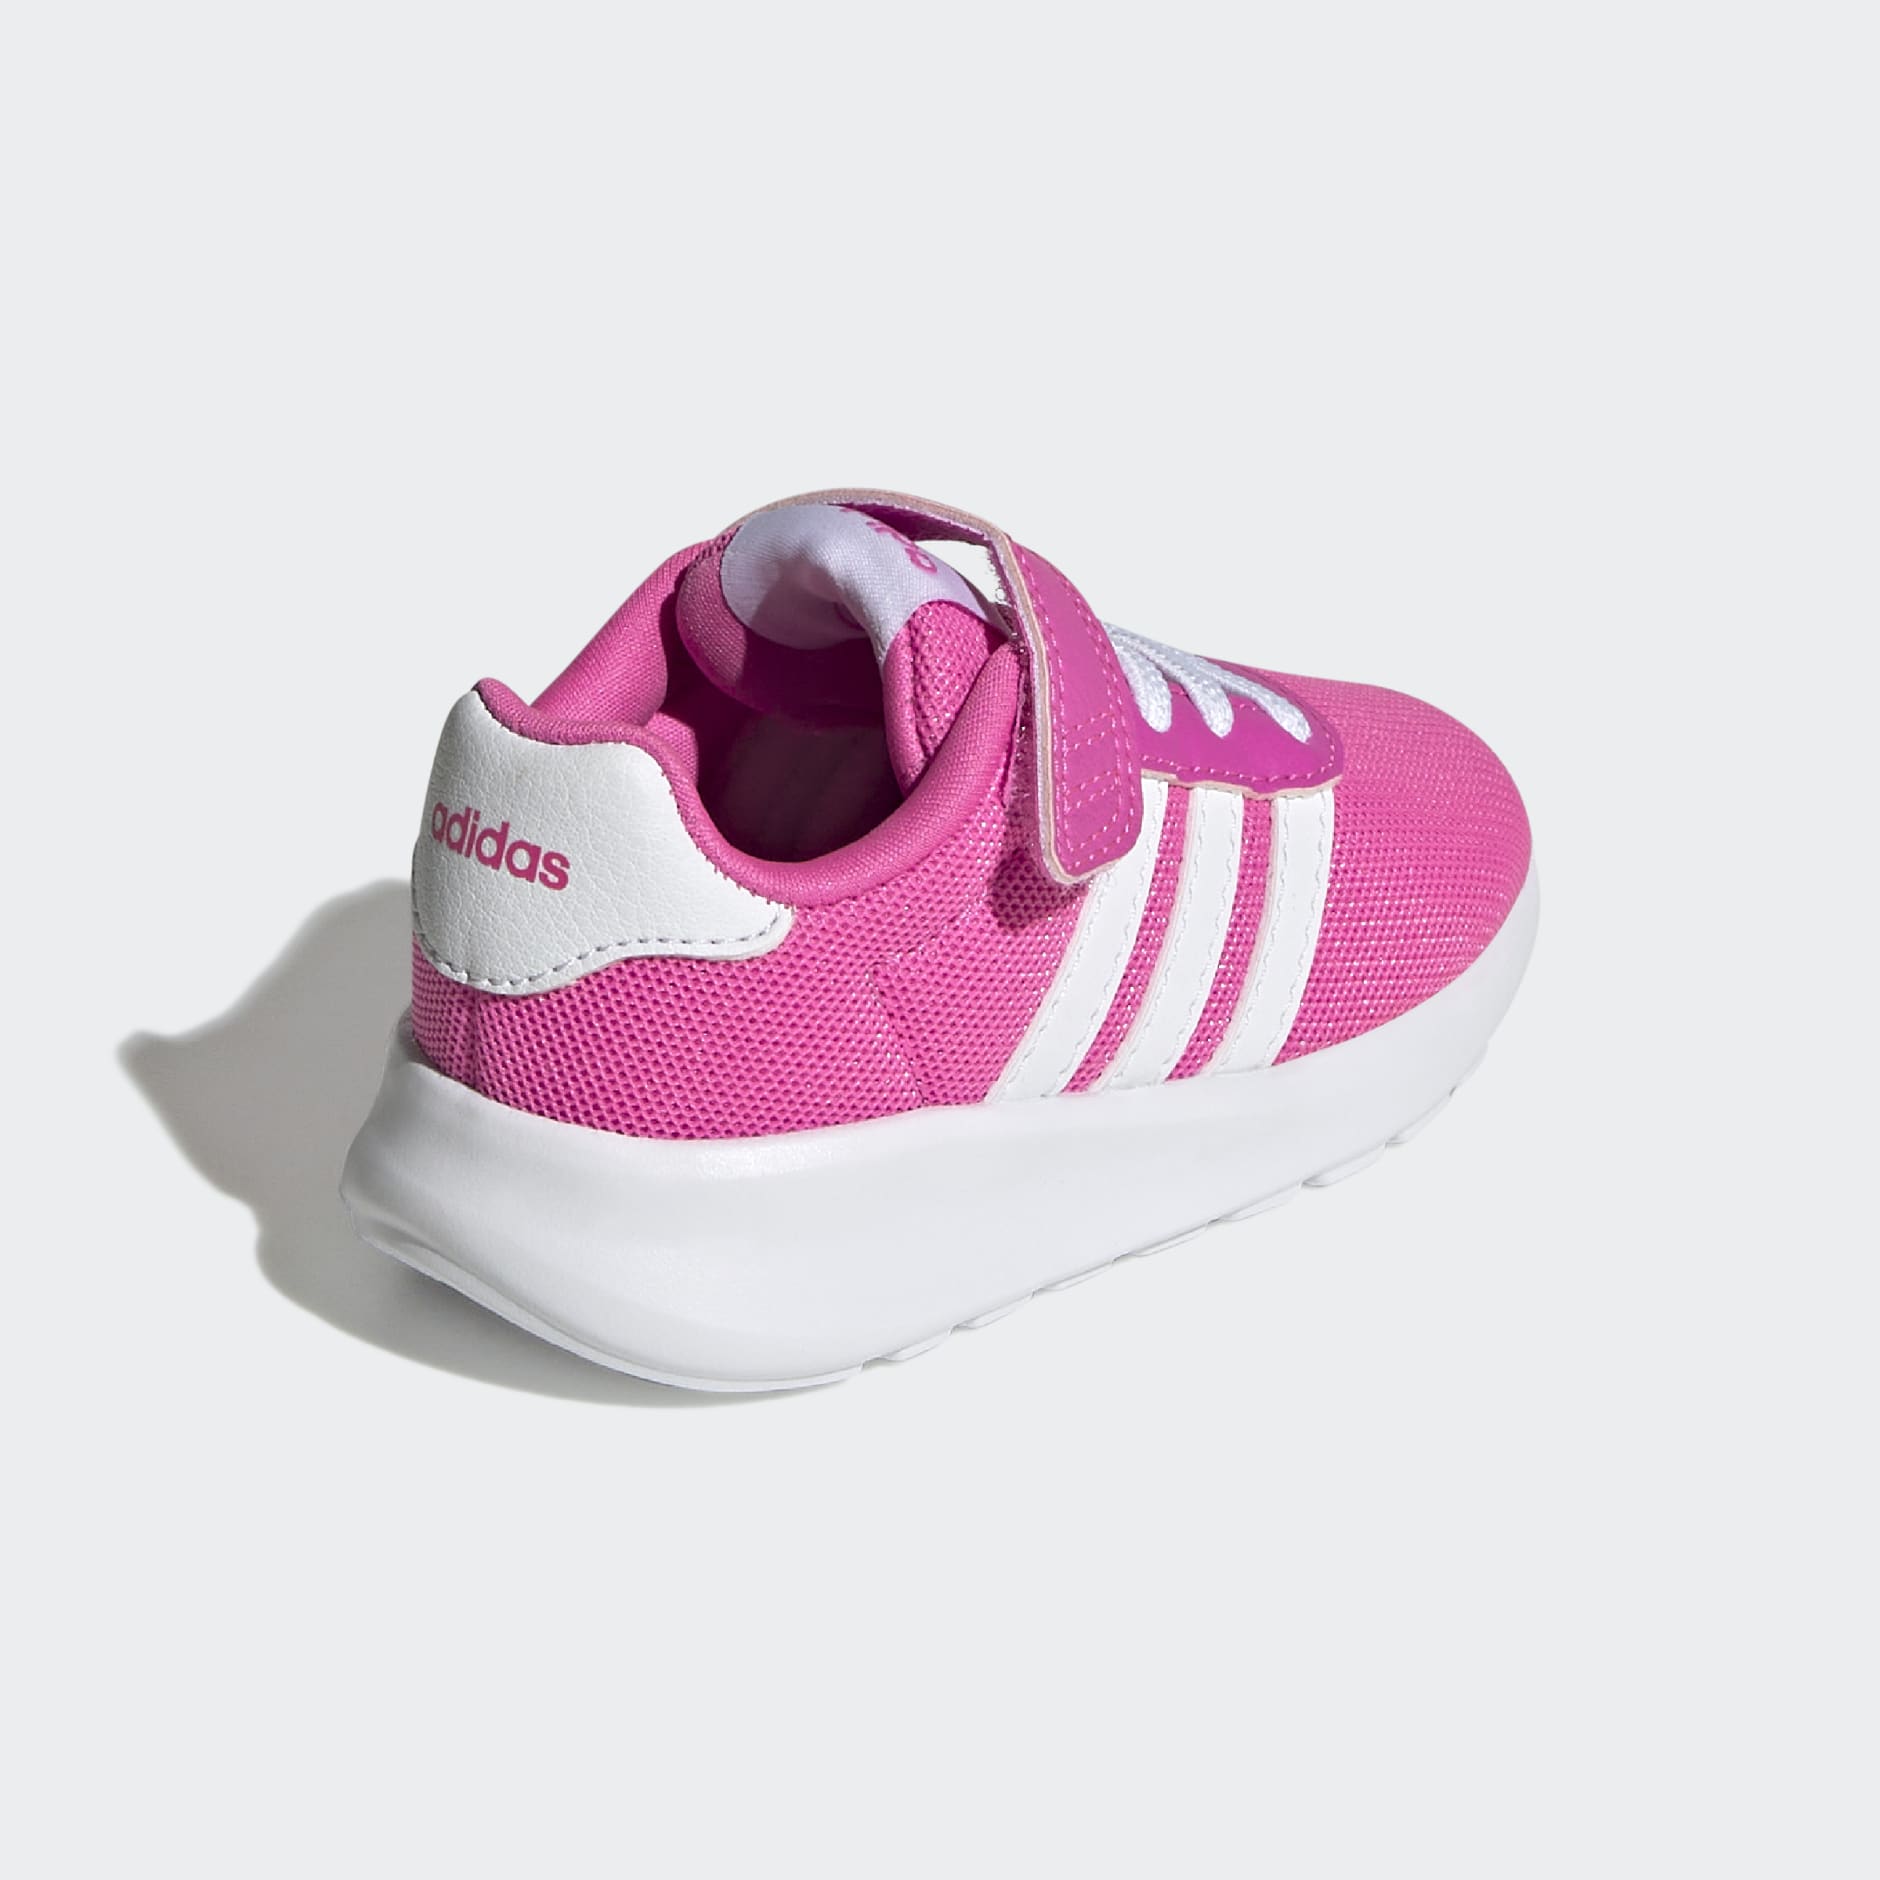 adidas Lite Racer 3.0 Shoes - Pink | adidas GH